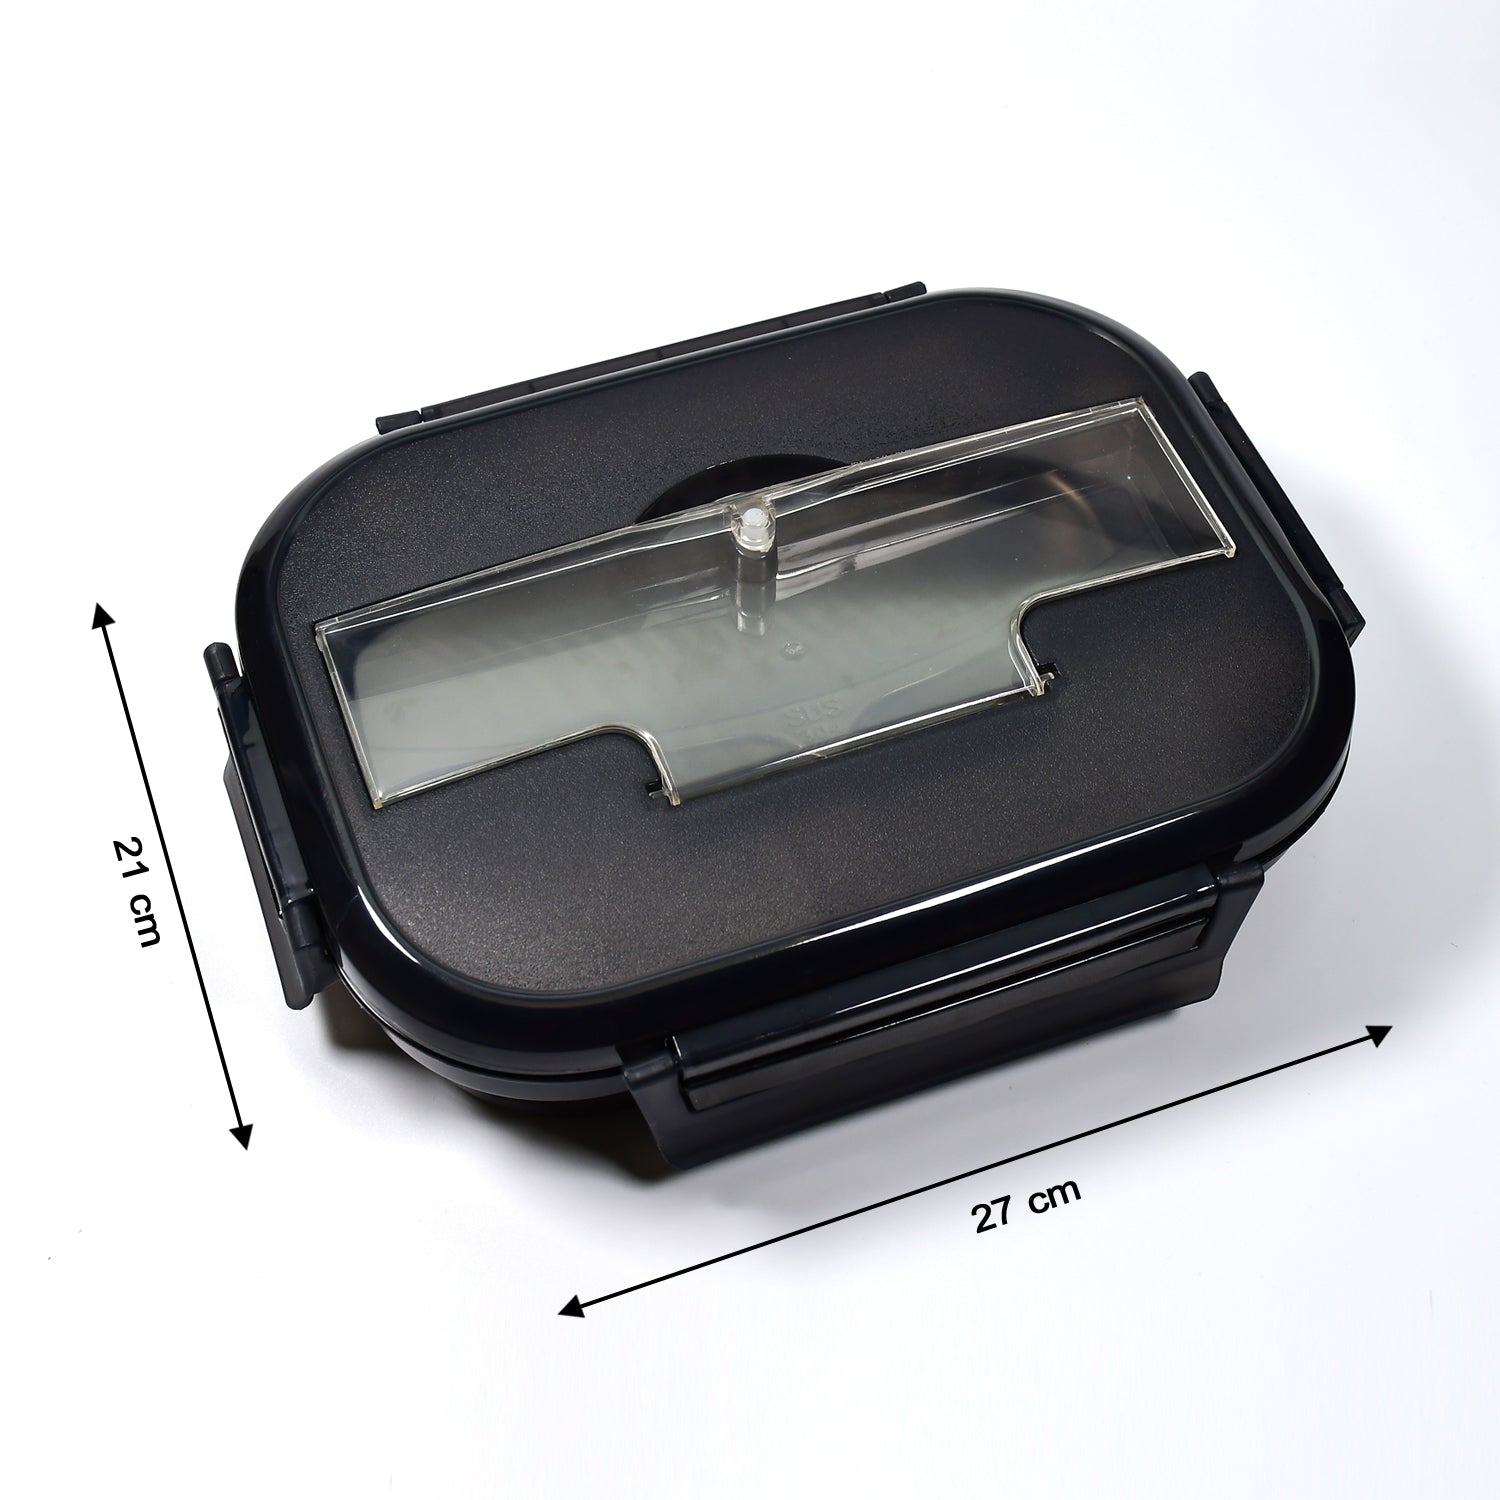 2042 Black Lunch Box for Kids and adults, Stainless Steel Lunch Box with 3 Compartments With spoon slot. DeoDap